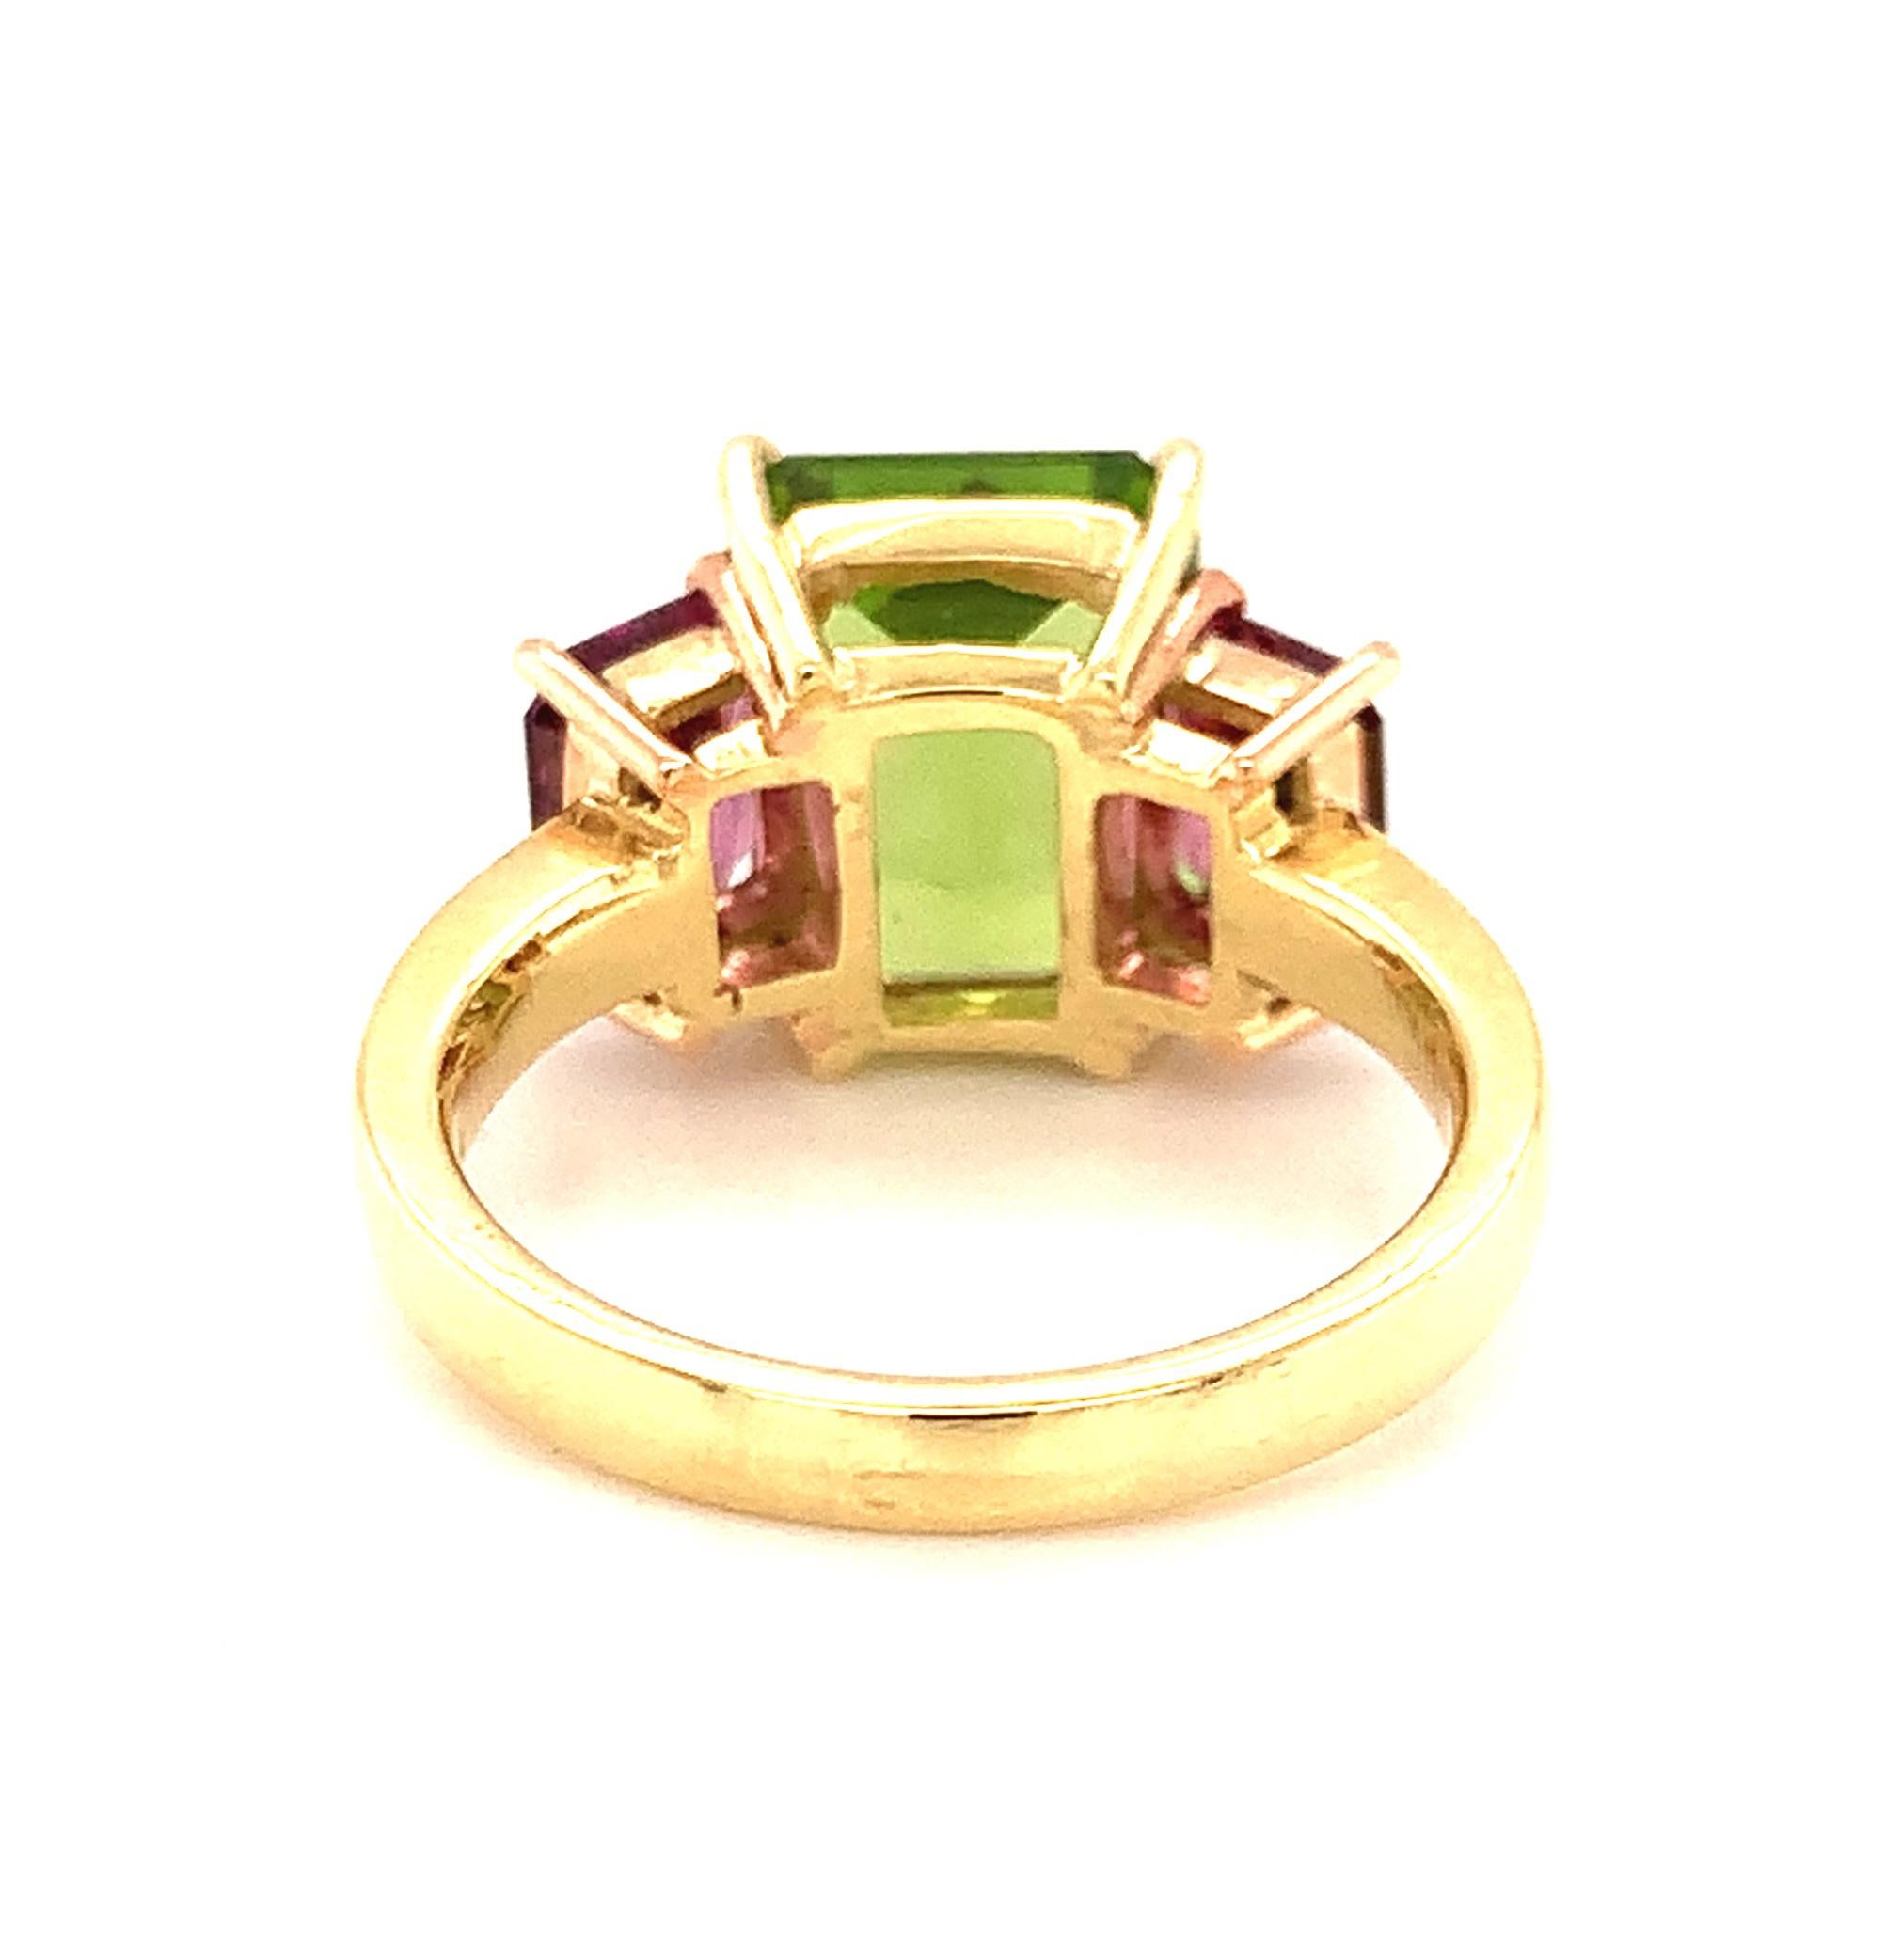 Women's 5.49 Carat Peridot and Rhodolite Garnet Three-Stone Ring in Yellow and Rose Gold For Sale